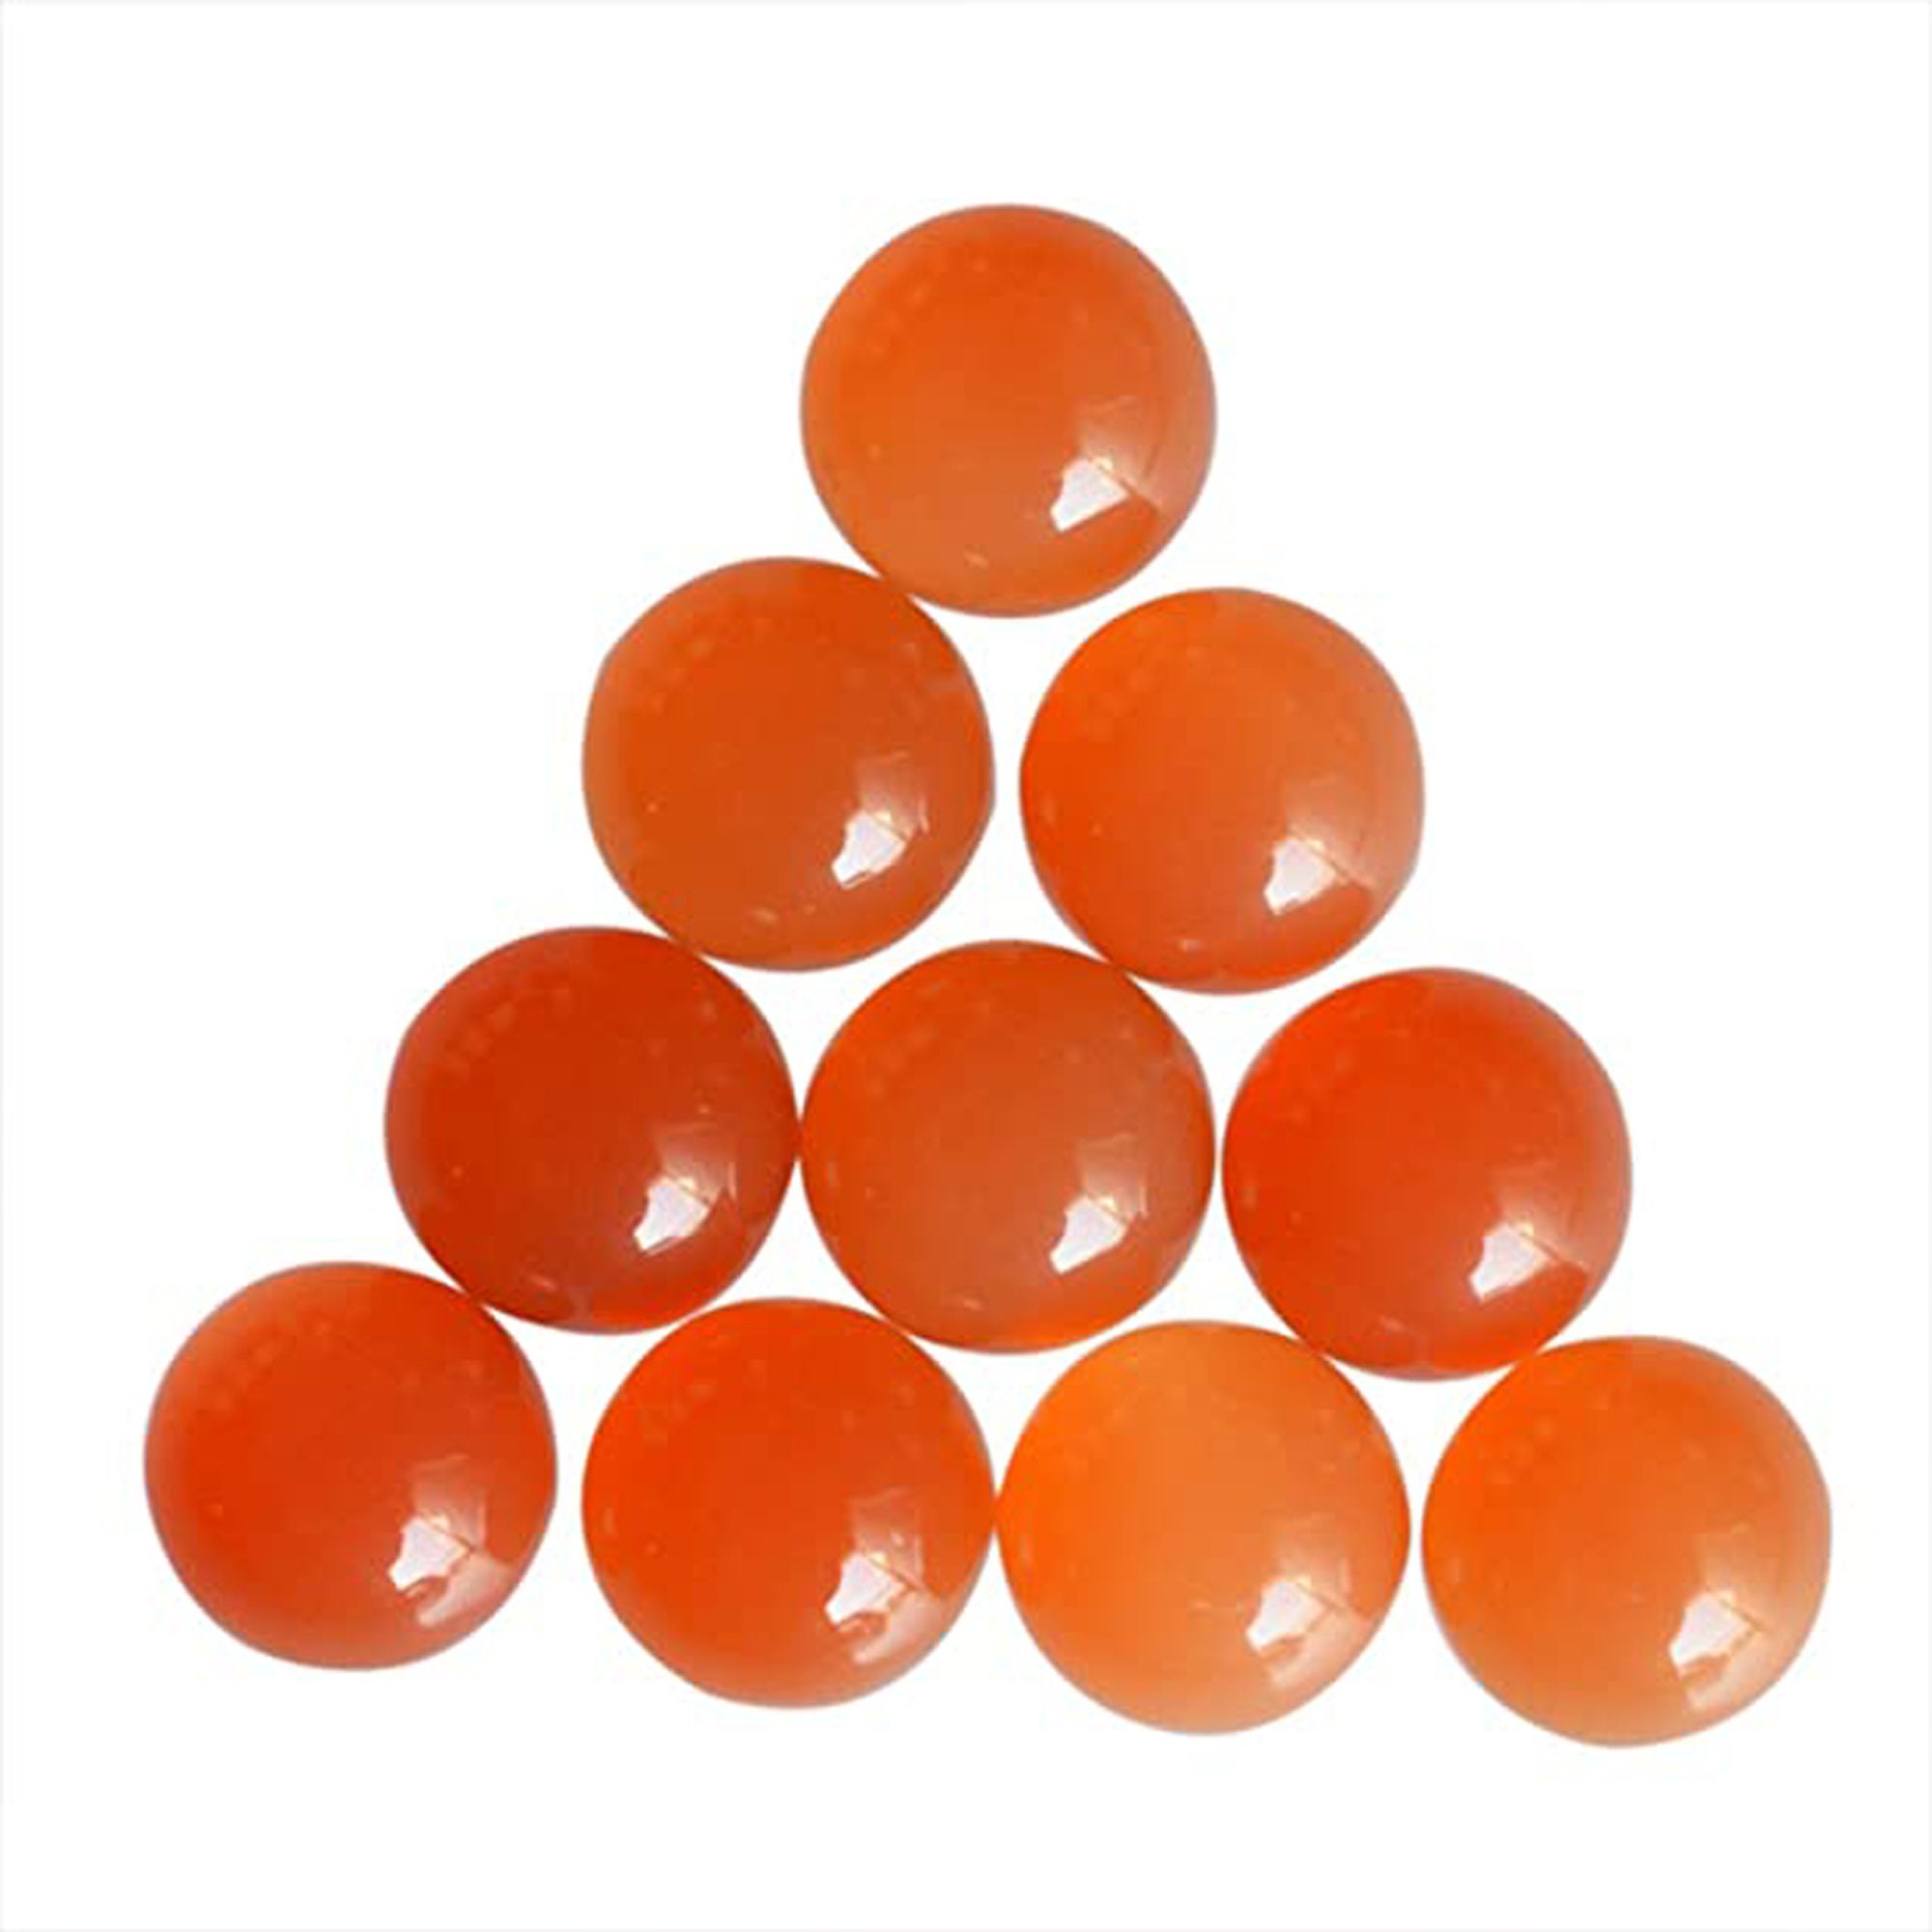 5x5 MM Carnelian Round Flatback Cabochon Loose Gemstones SP-239 Details about   Top A+++ 